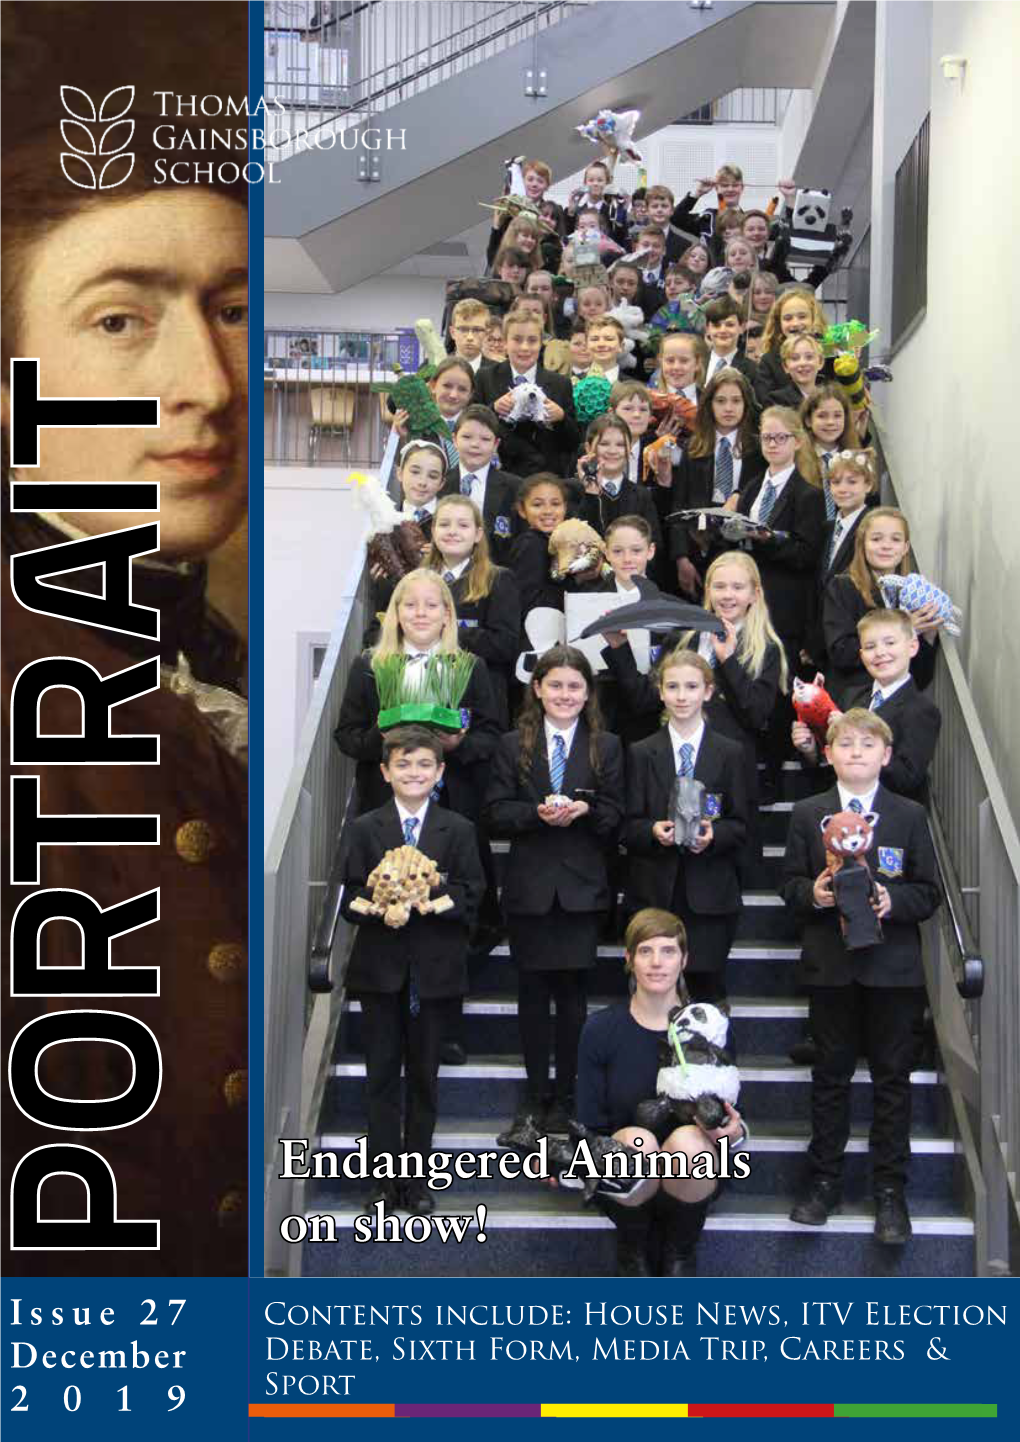 2019 December Issue 27 PORTRAIT Sport Debate, Sixth Form, Media Trip, Careers & Contents Include: House Itvelection News, on Show! Endangered Animals Contents